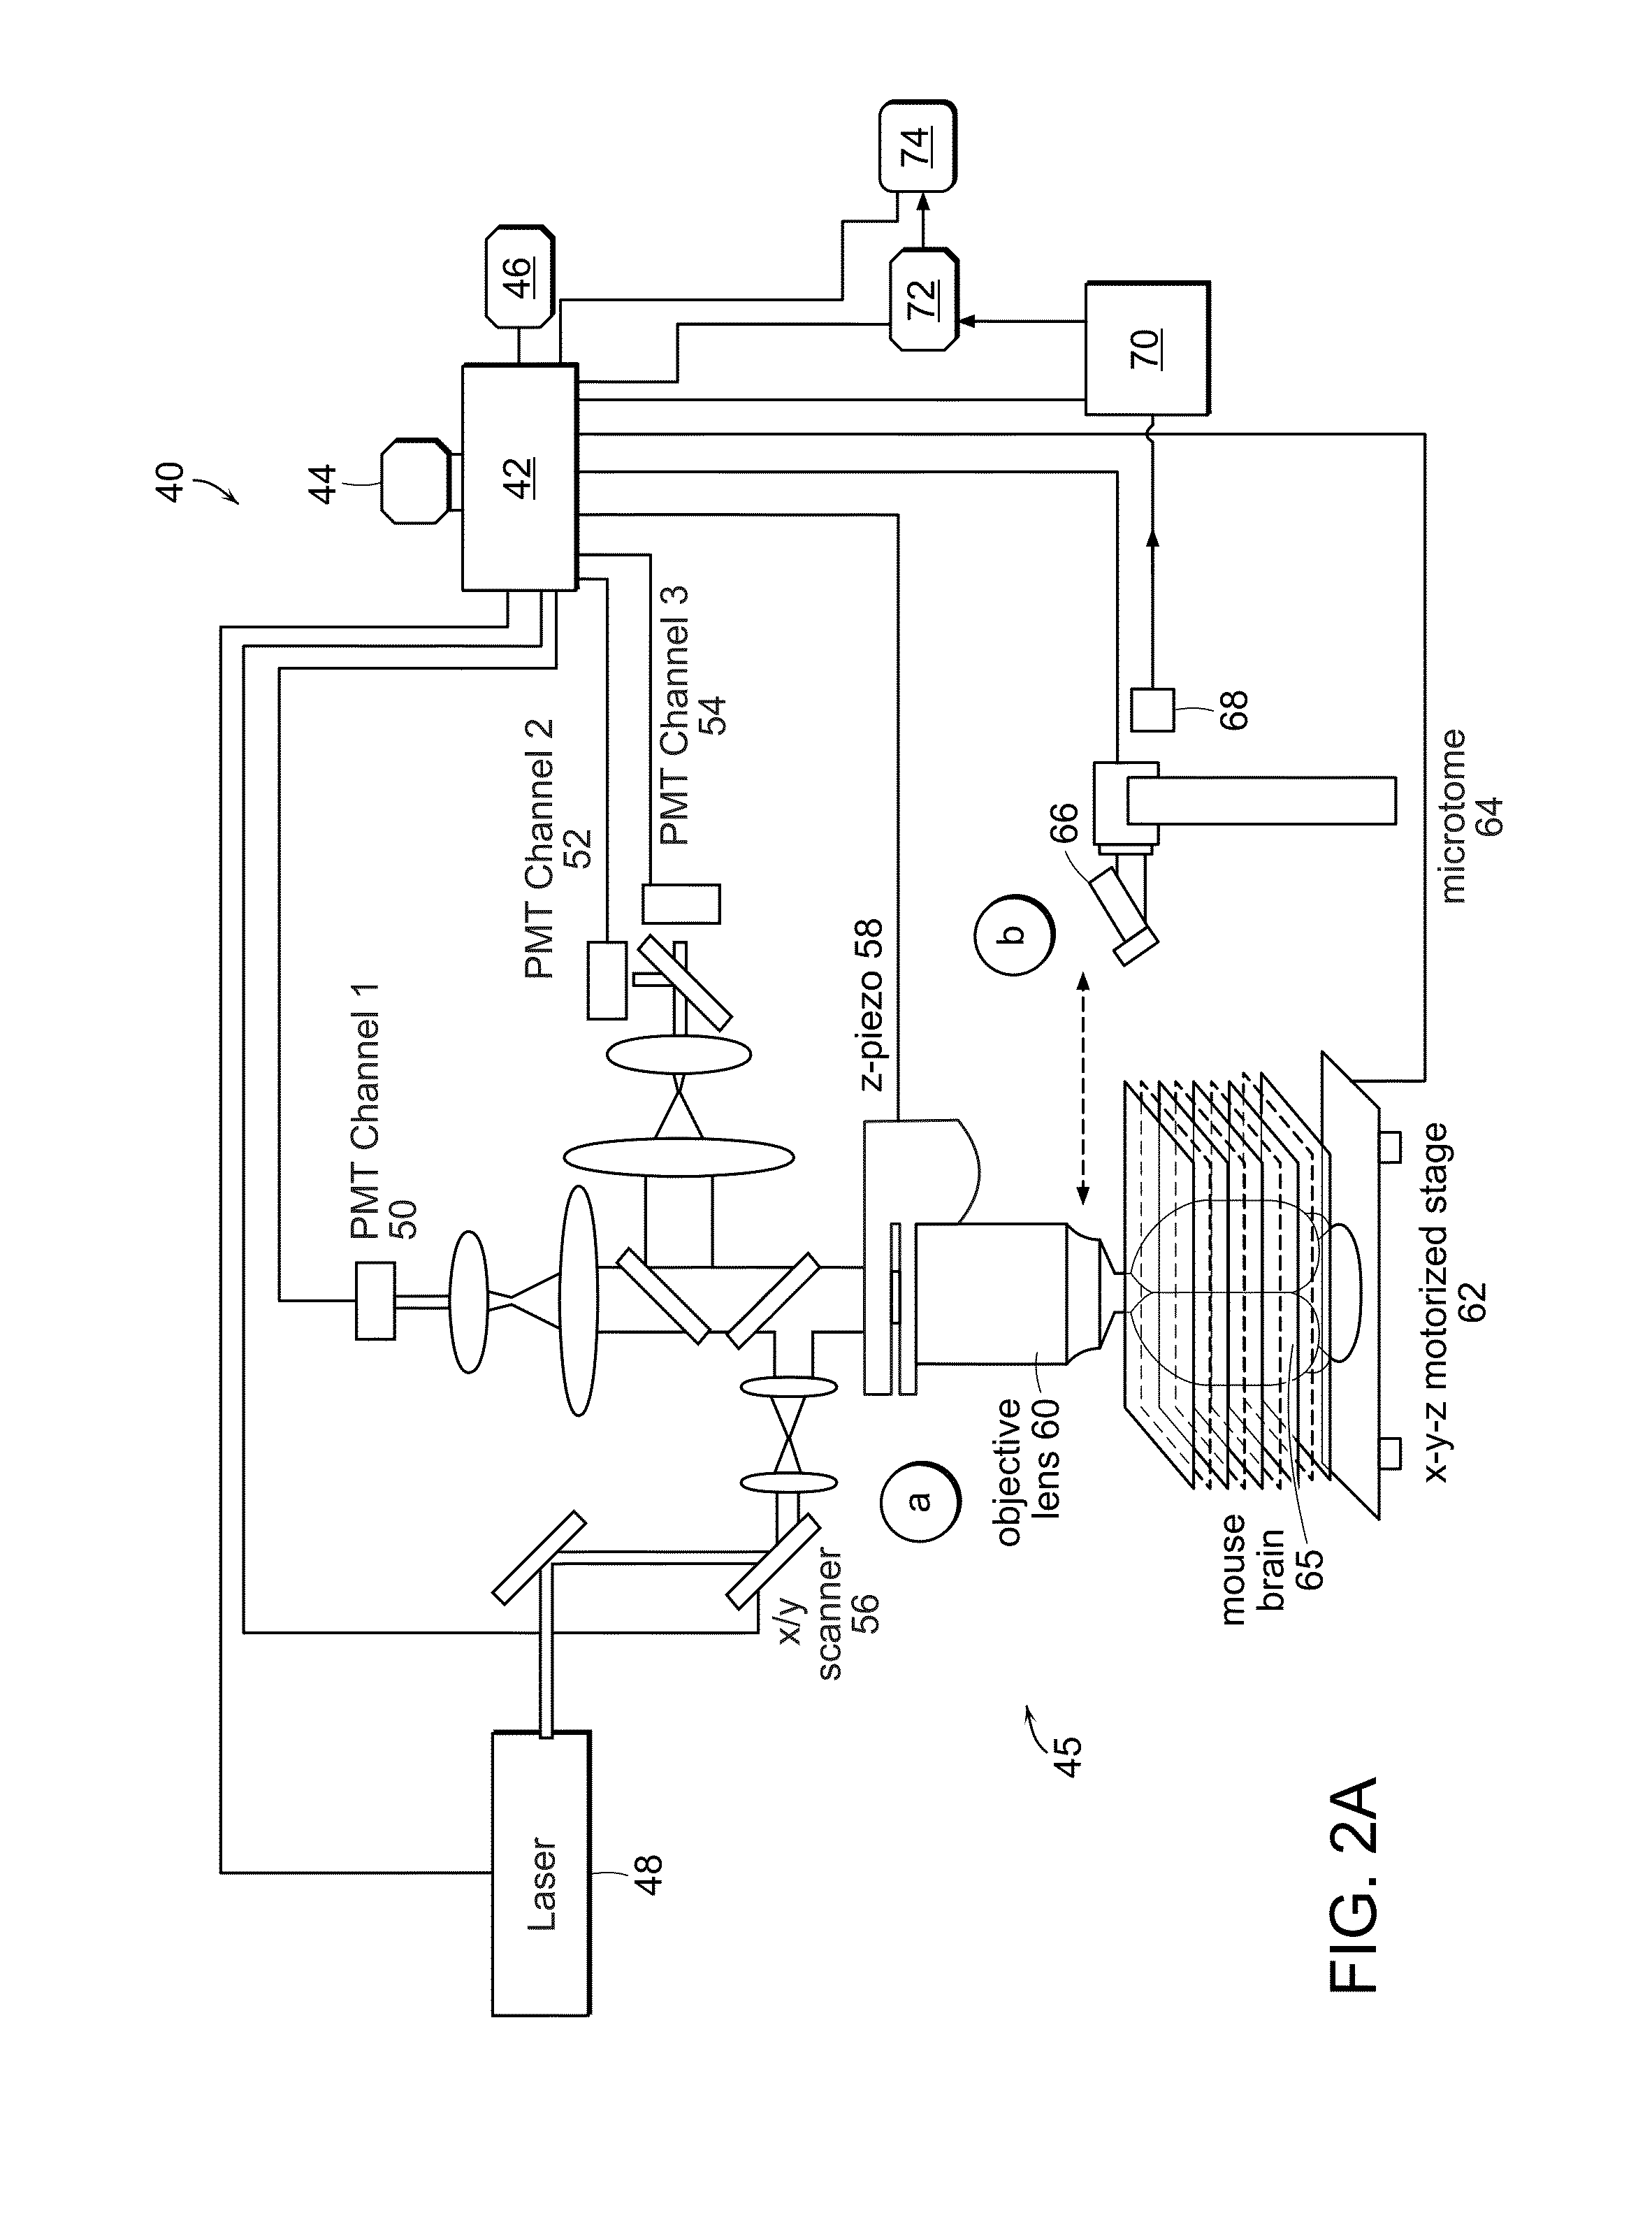 Systems and methods for imaging and processing tissue